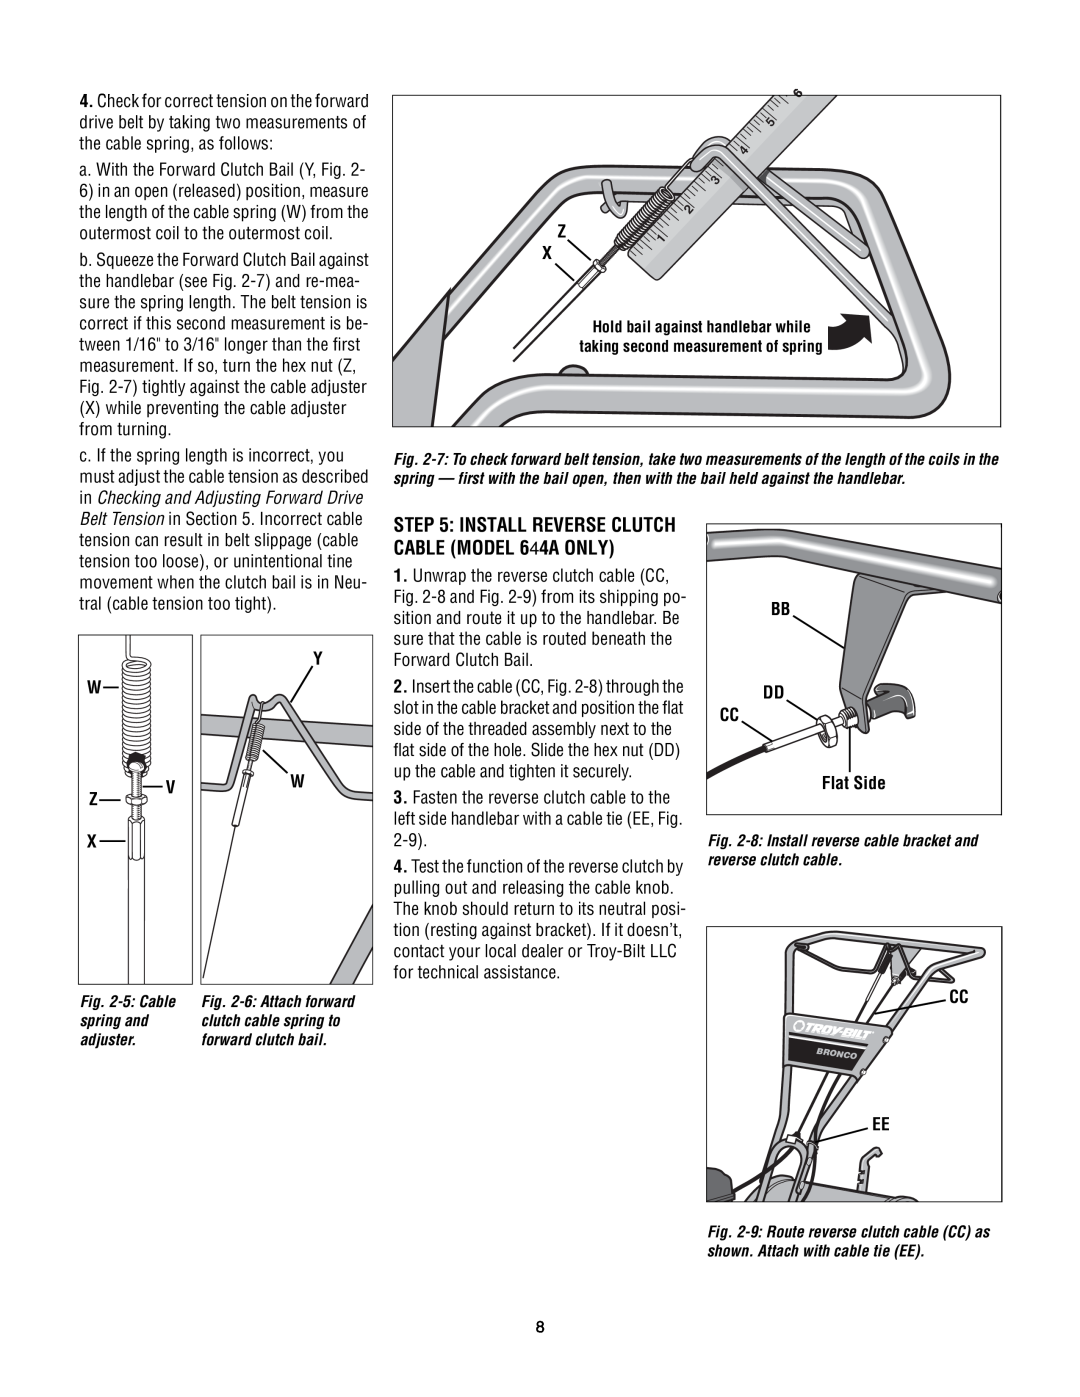 Troy-Bilt 640C - Tuffy CRT, 644A - Super Bronco CRT manual X while preventing the cable adjuster from turning, Flat Side 